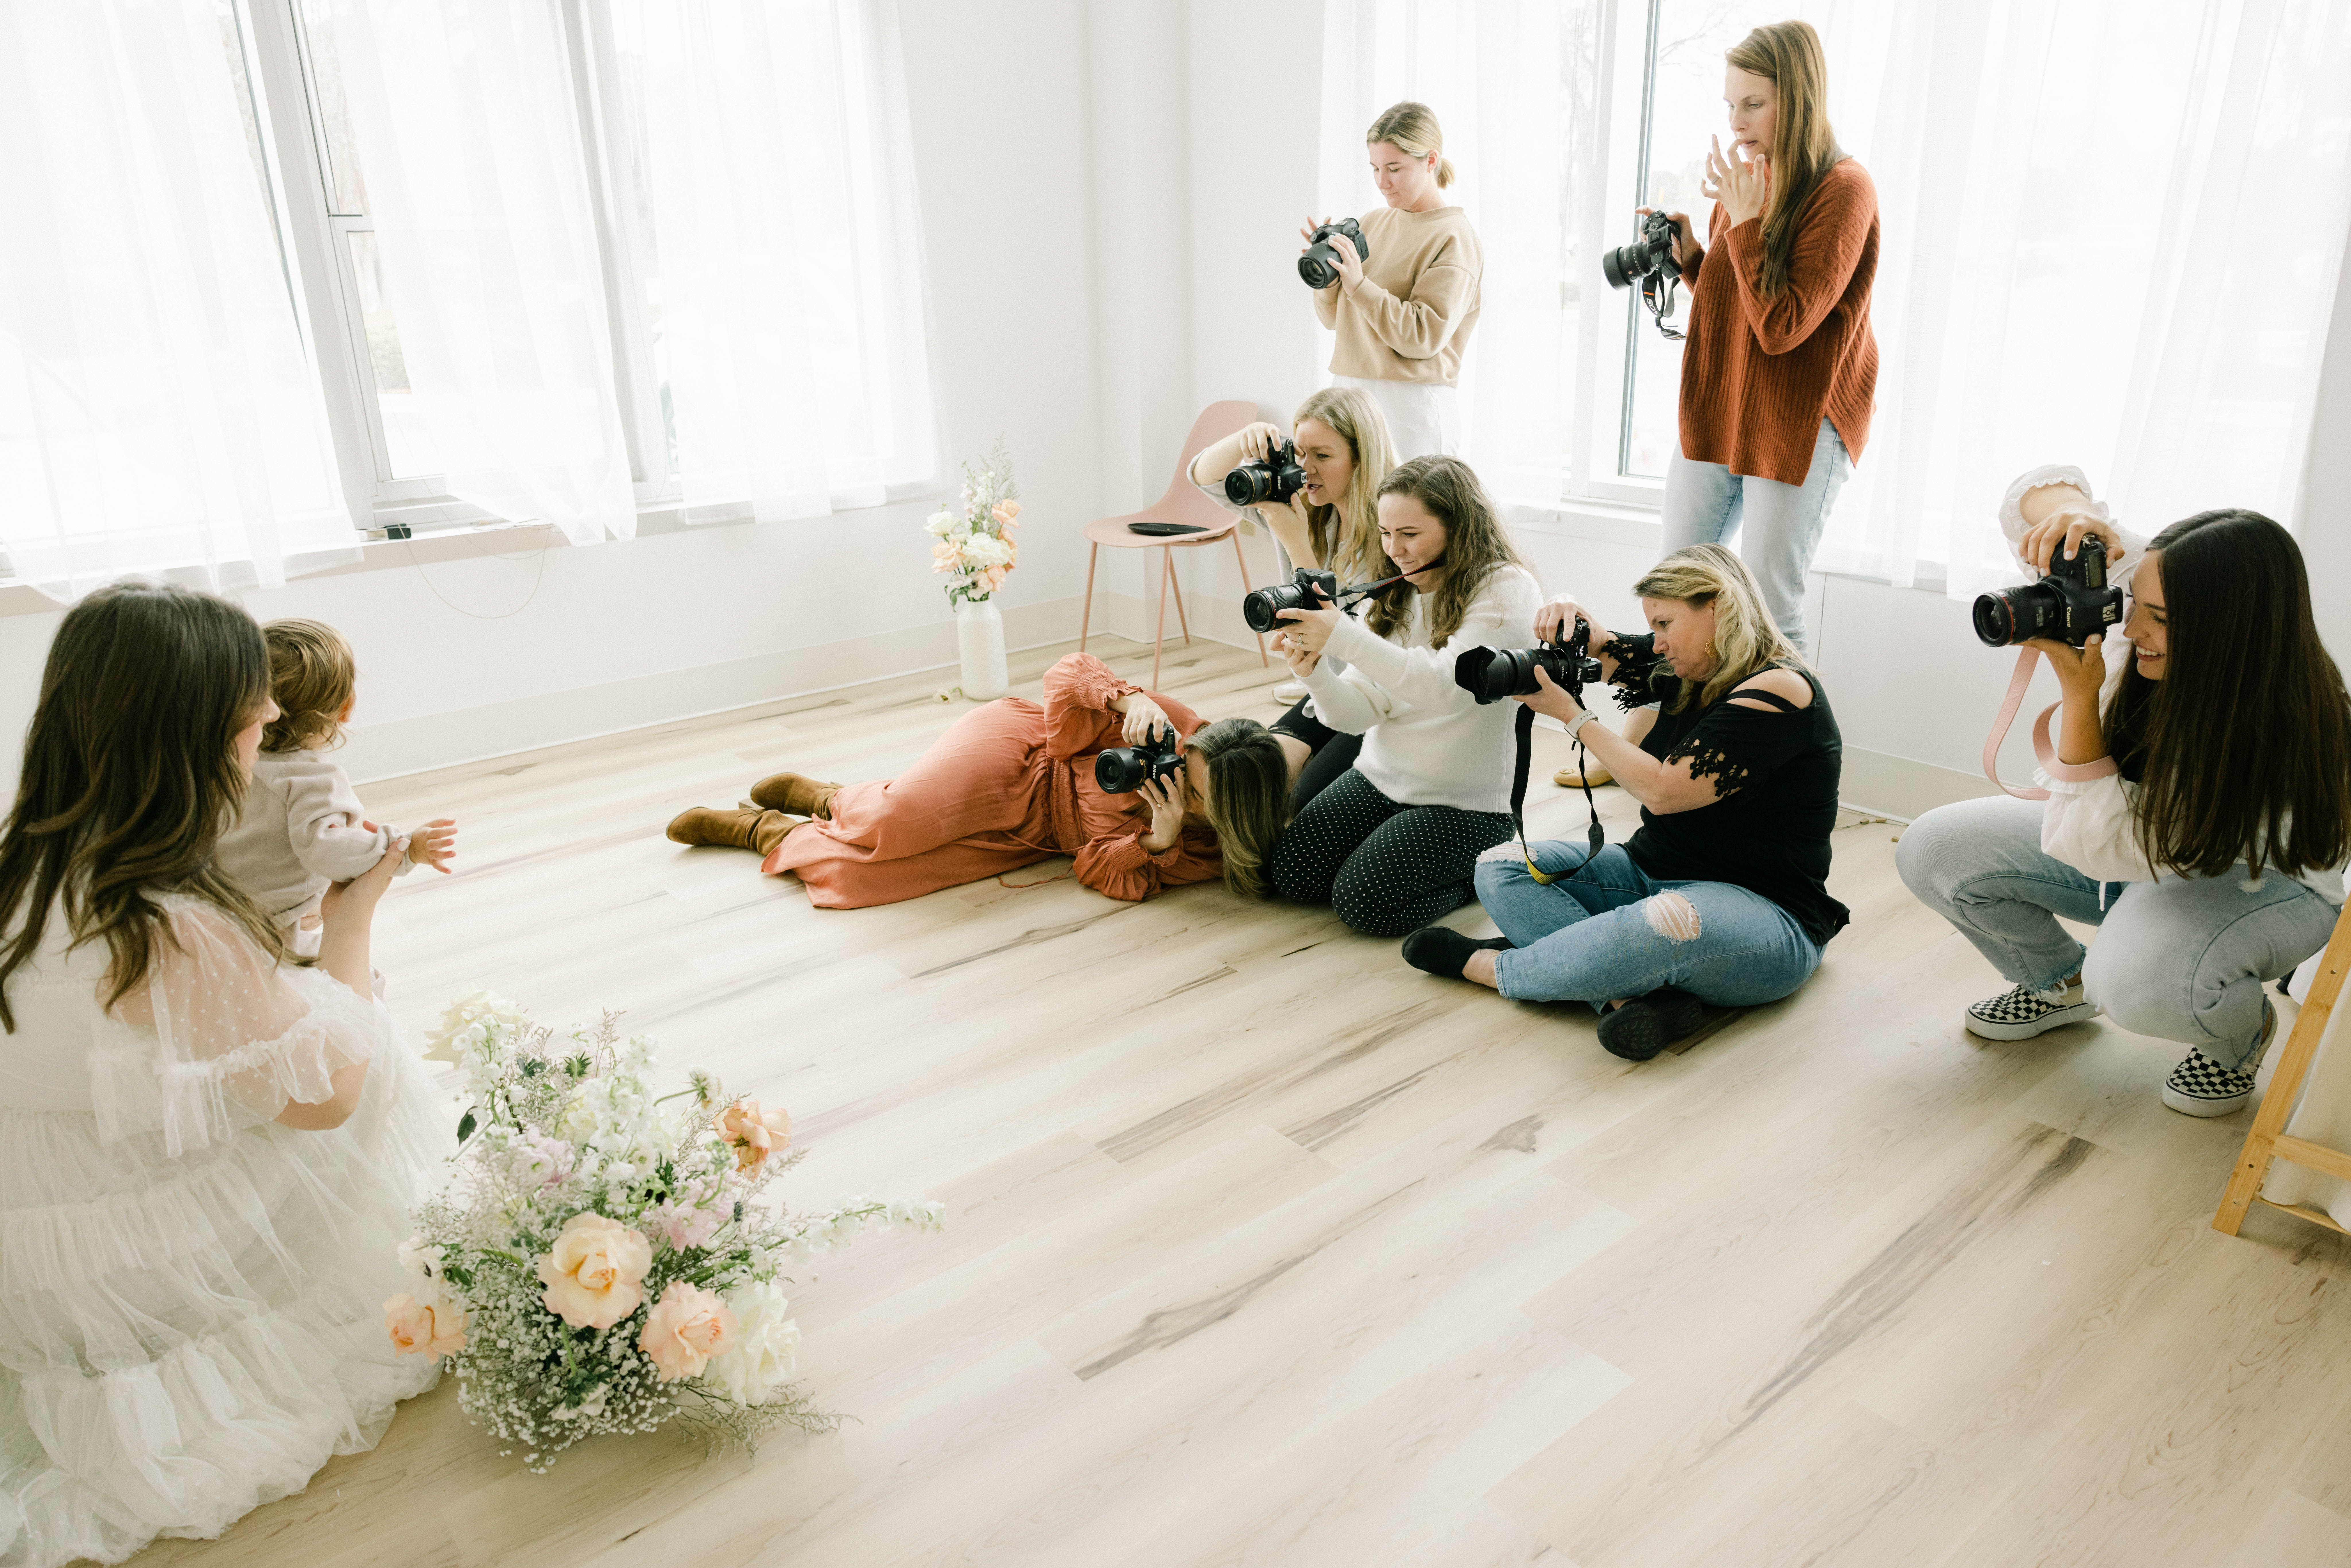 CAP elevate coworking women taking photos with cameras